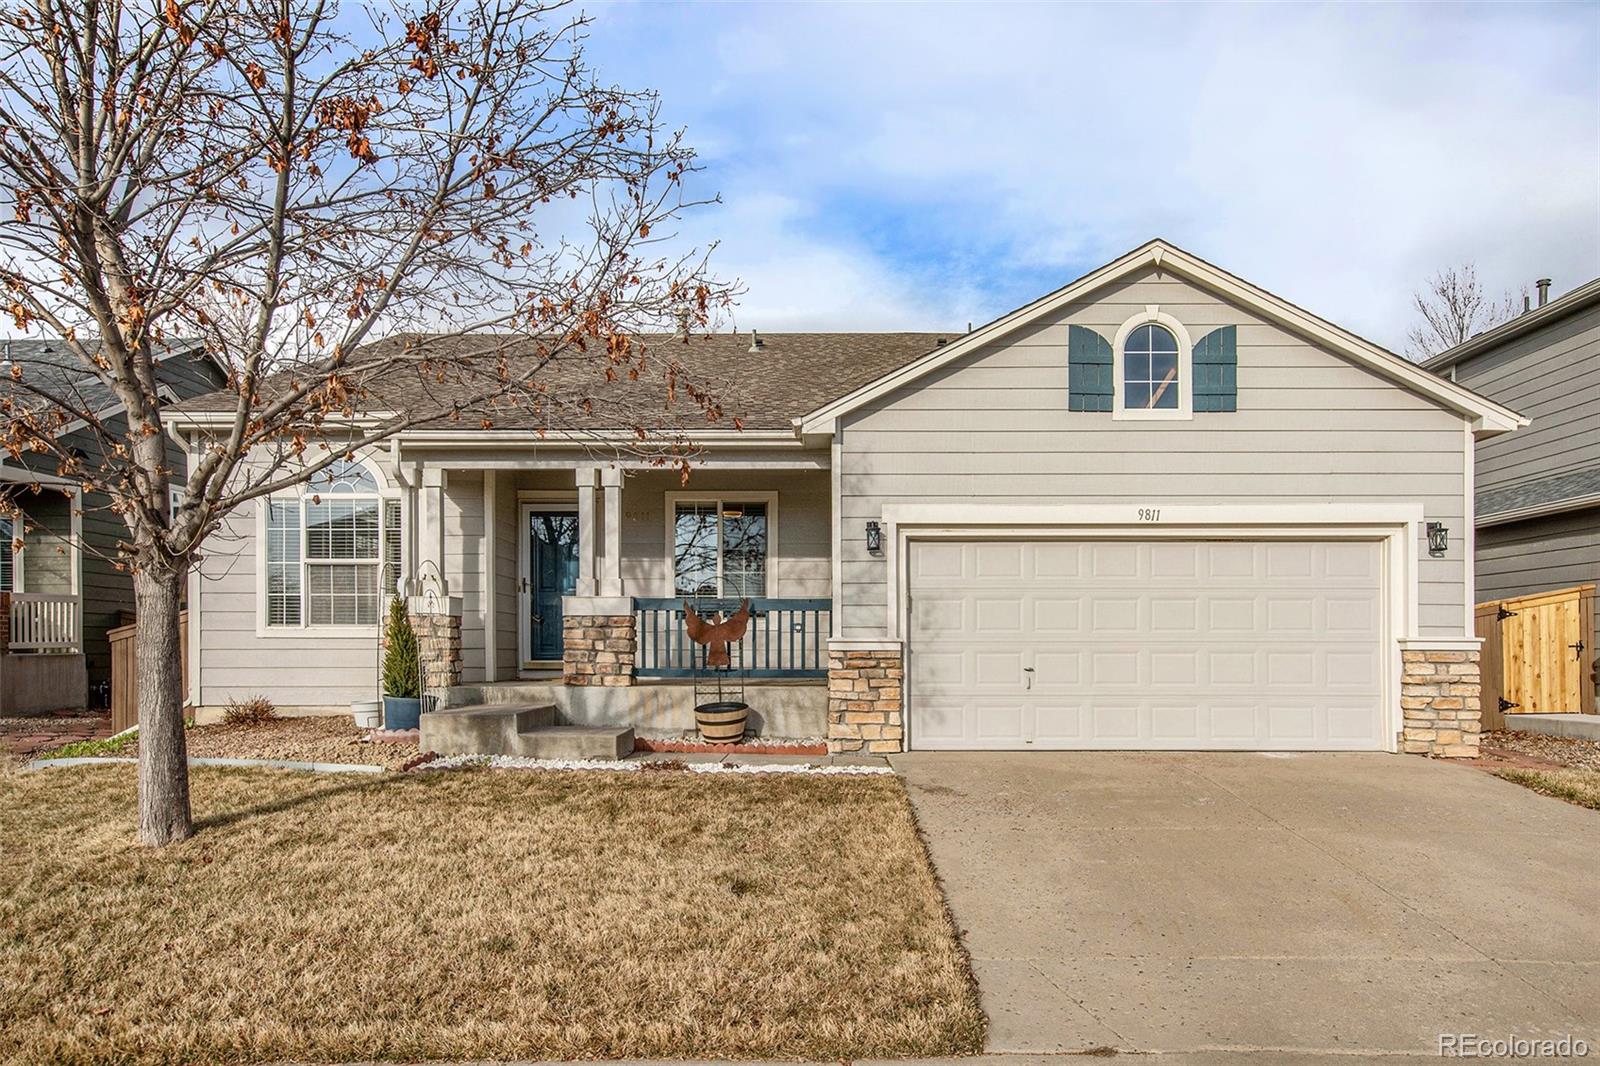 9811  atherton way, Highlands Ranch sold home. Closed on 2024-04-02 for $638,000.